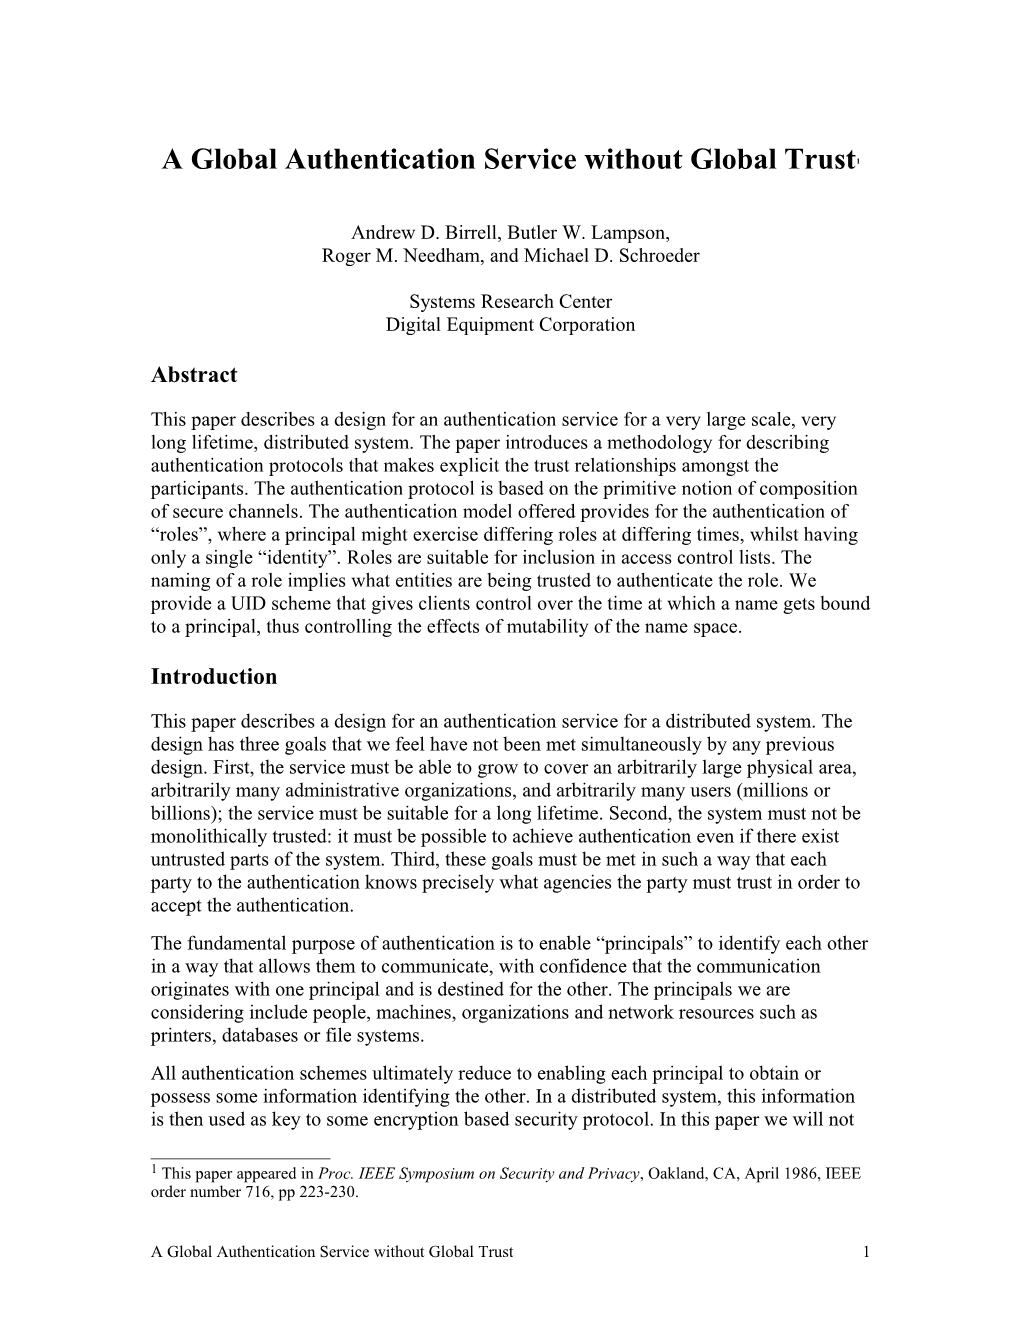 A Global Authentication Service Without Global Trust